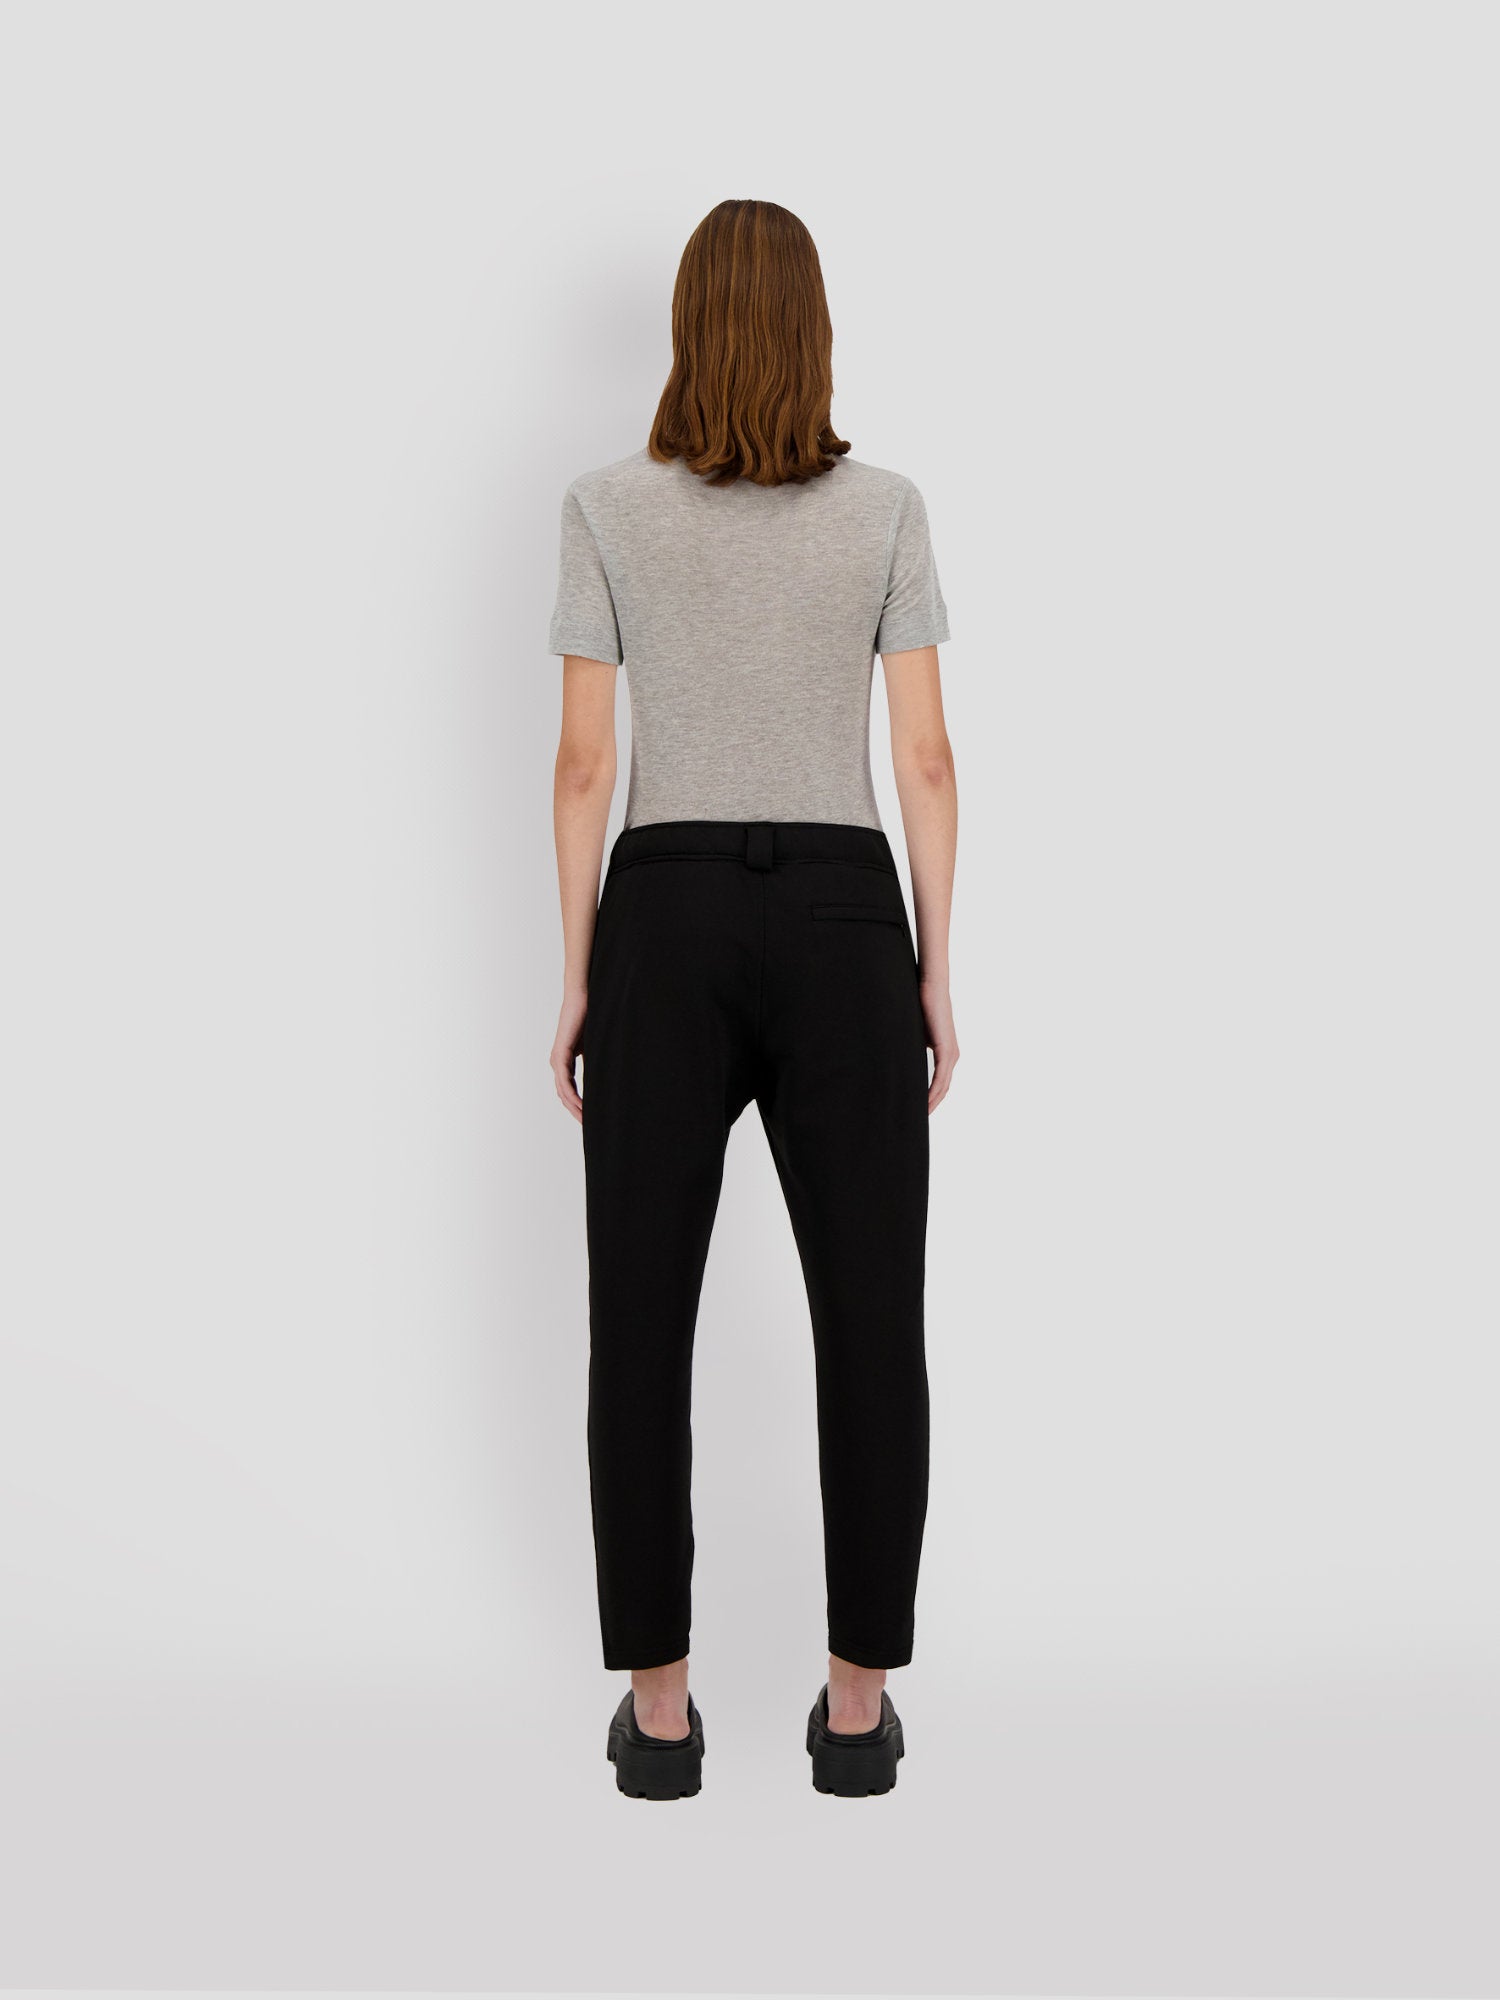 BLACK CROPPED SWEATPANTS WITH THEO LOGO